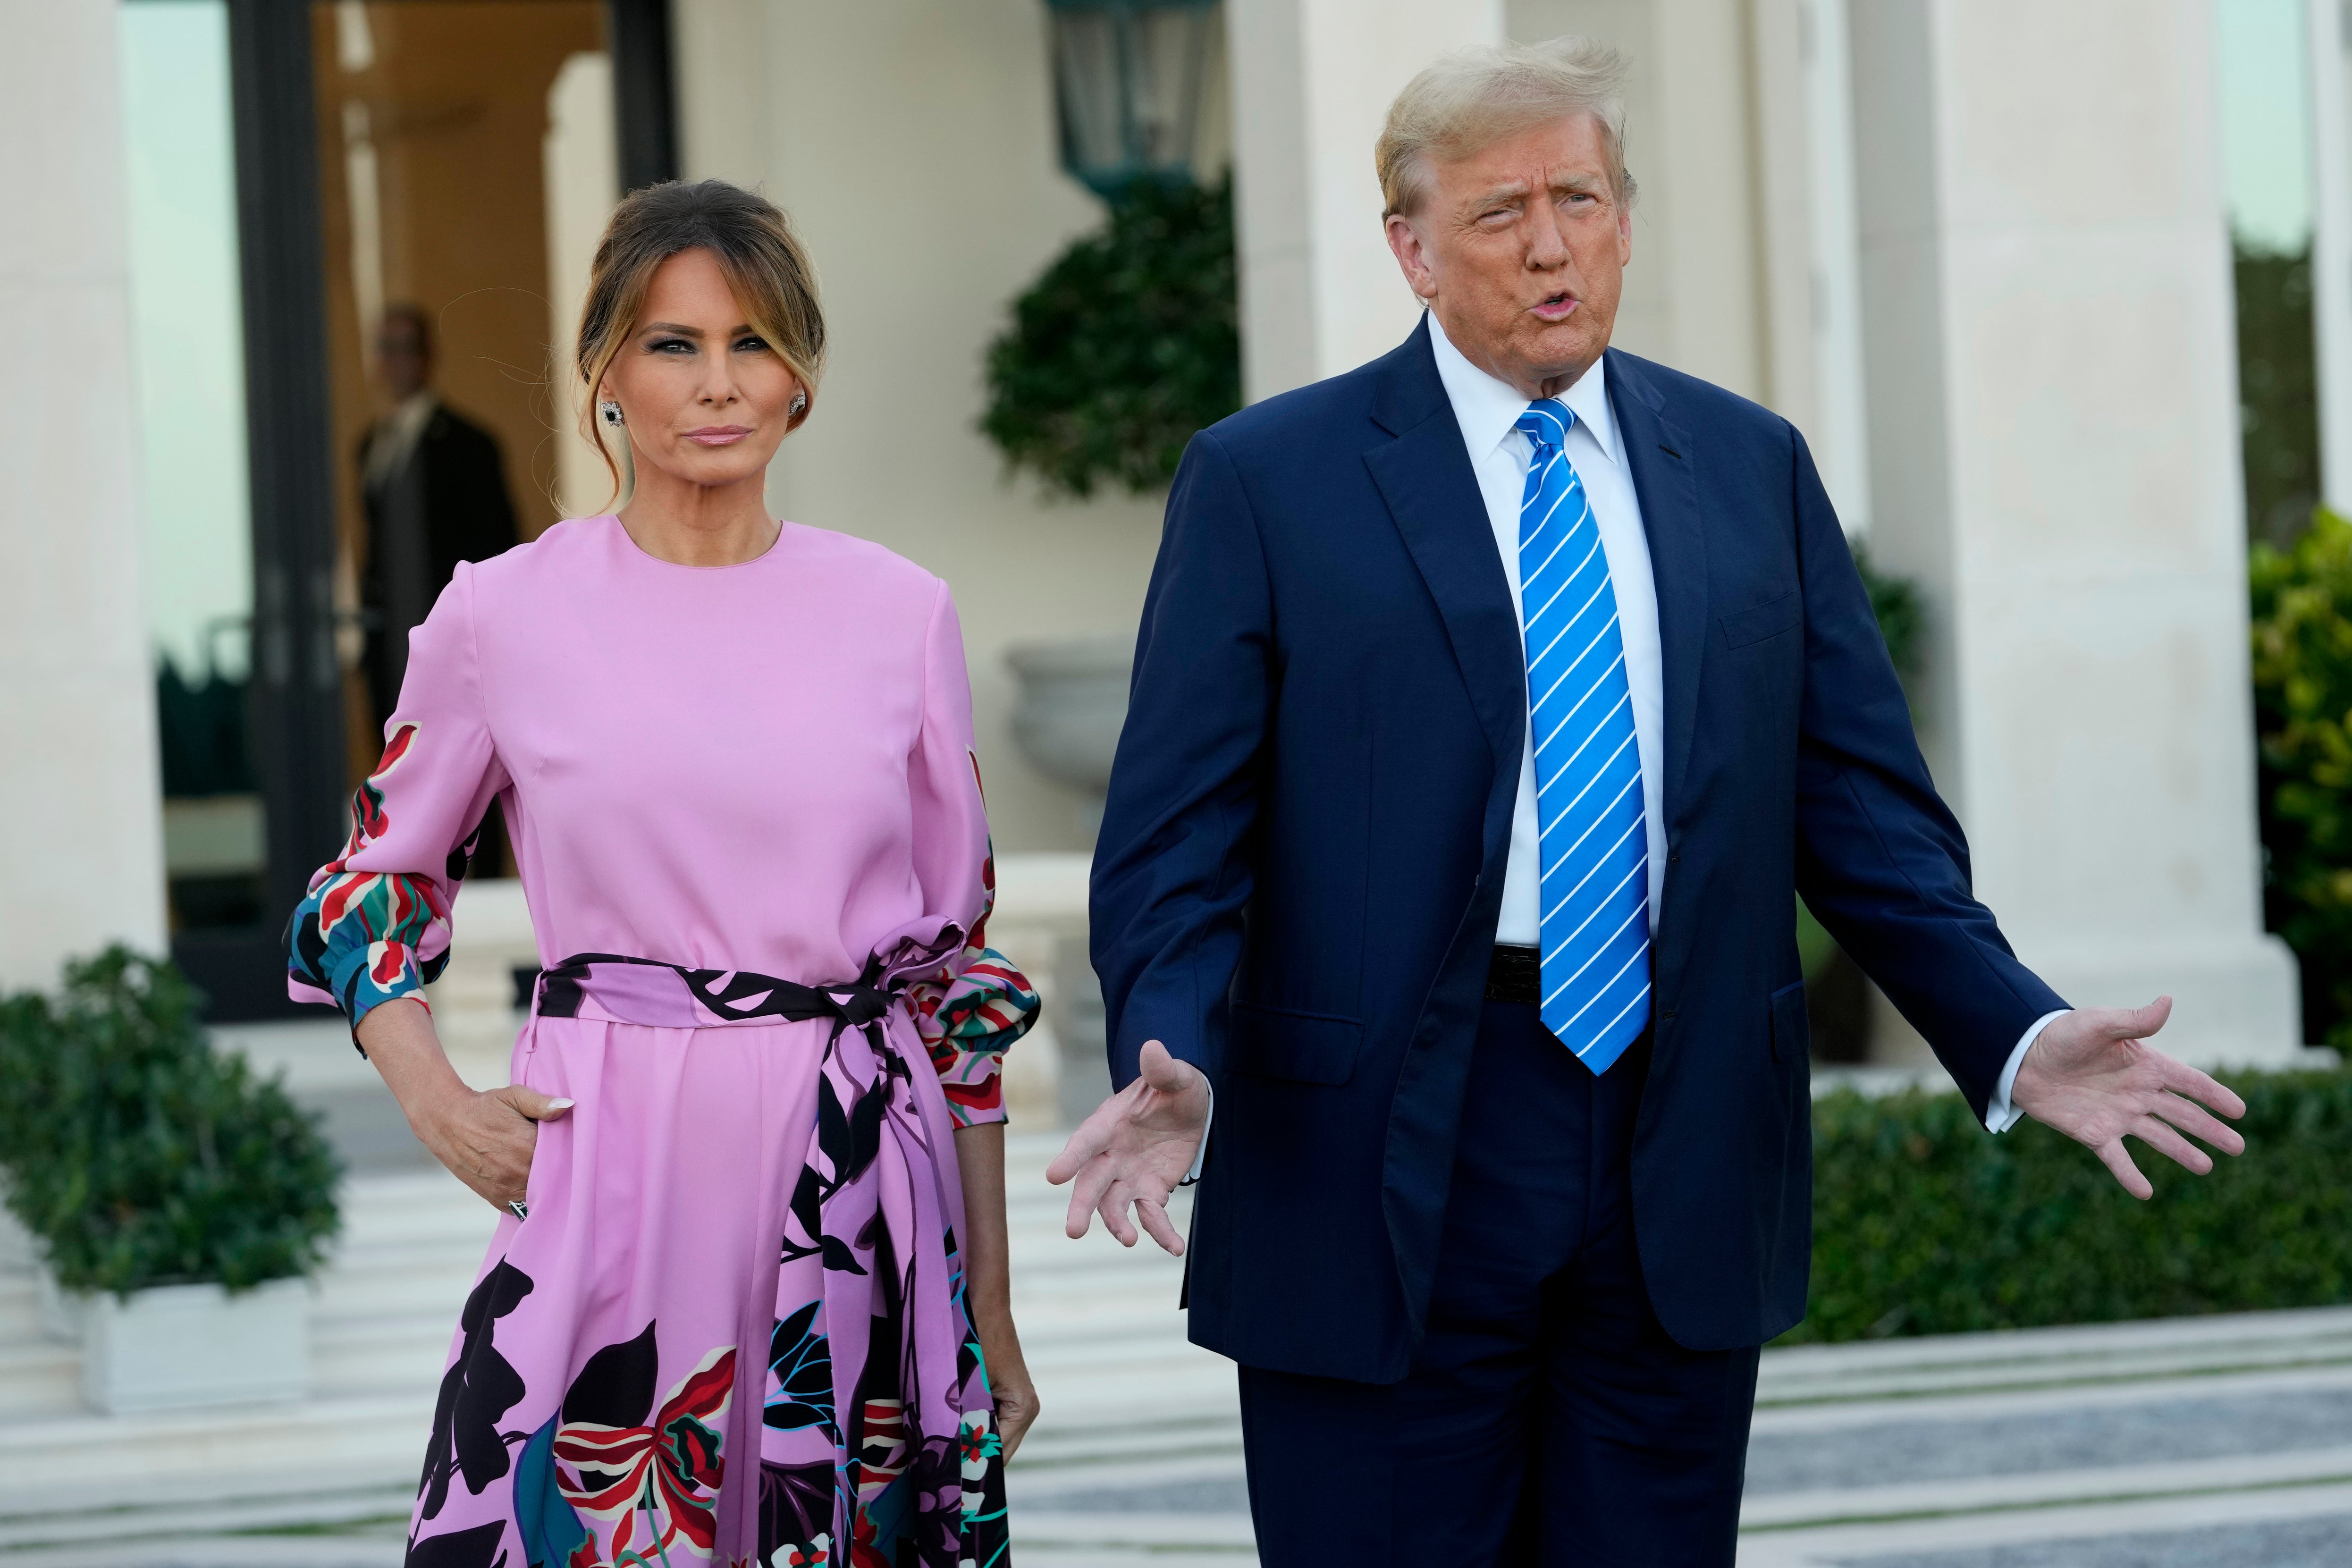 Melania attended a fundraiser earlier this month